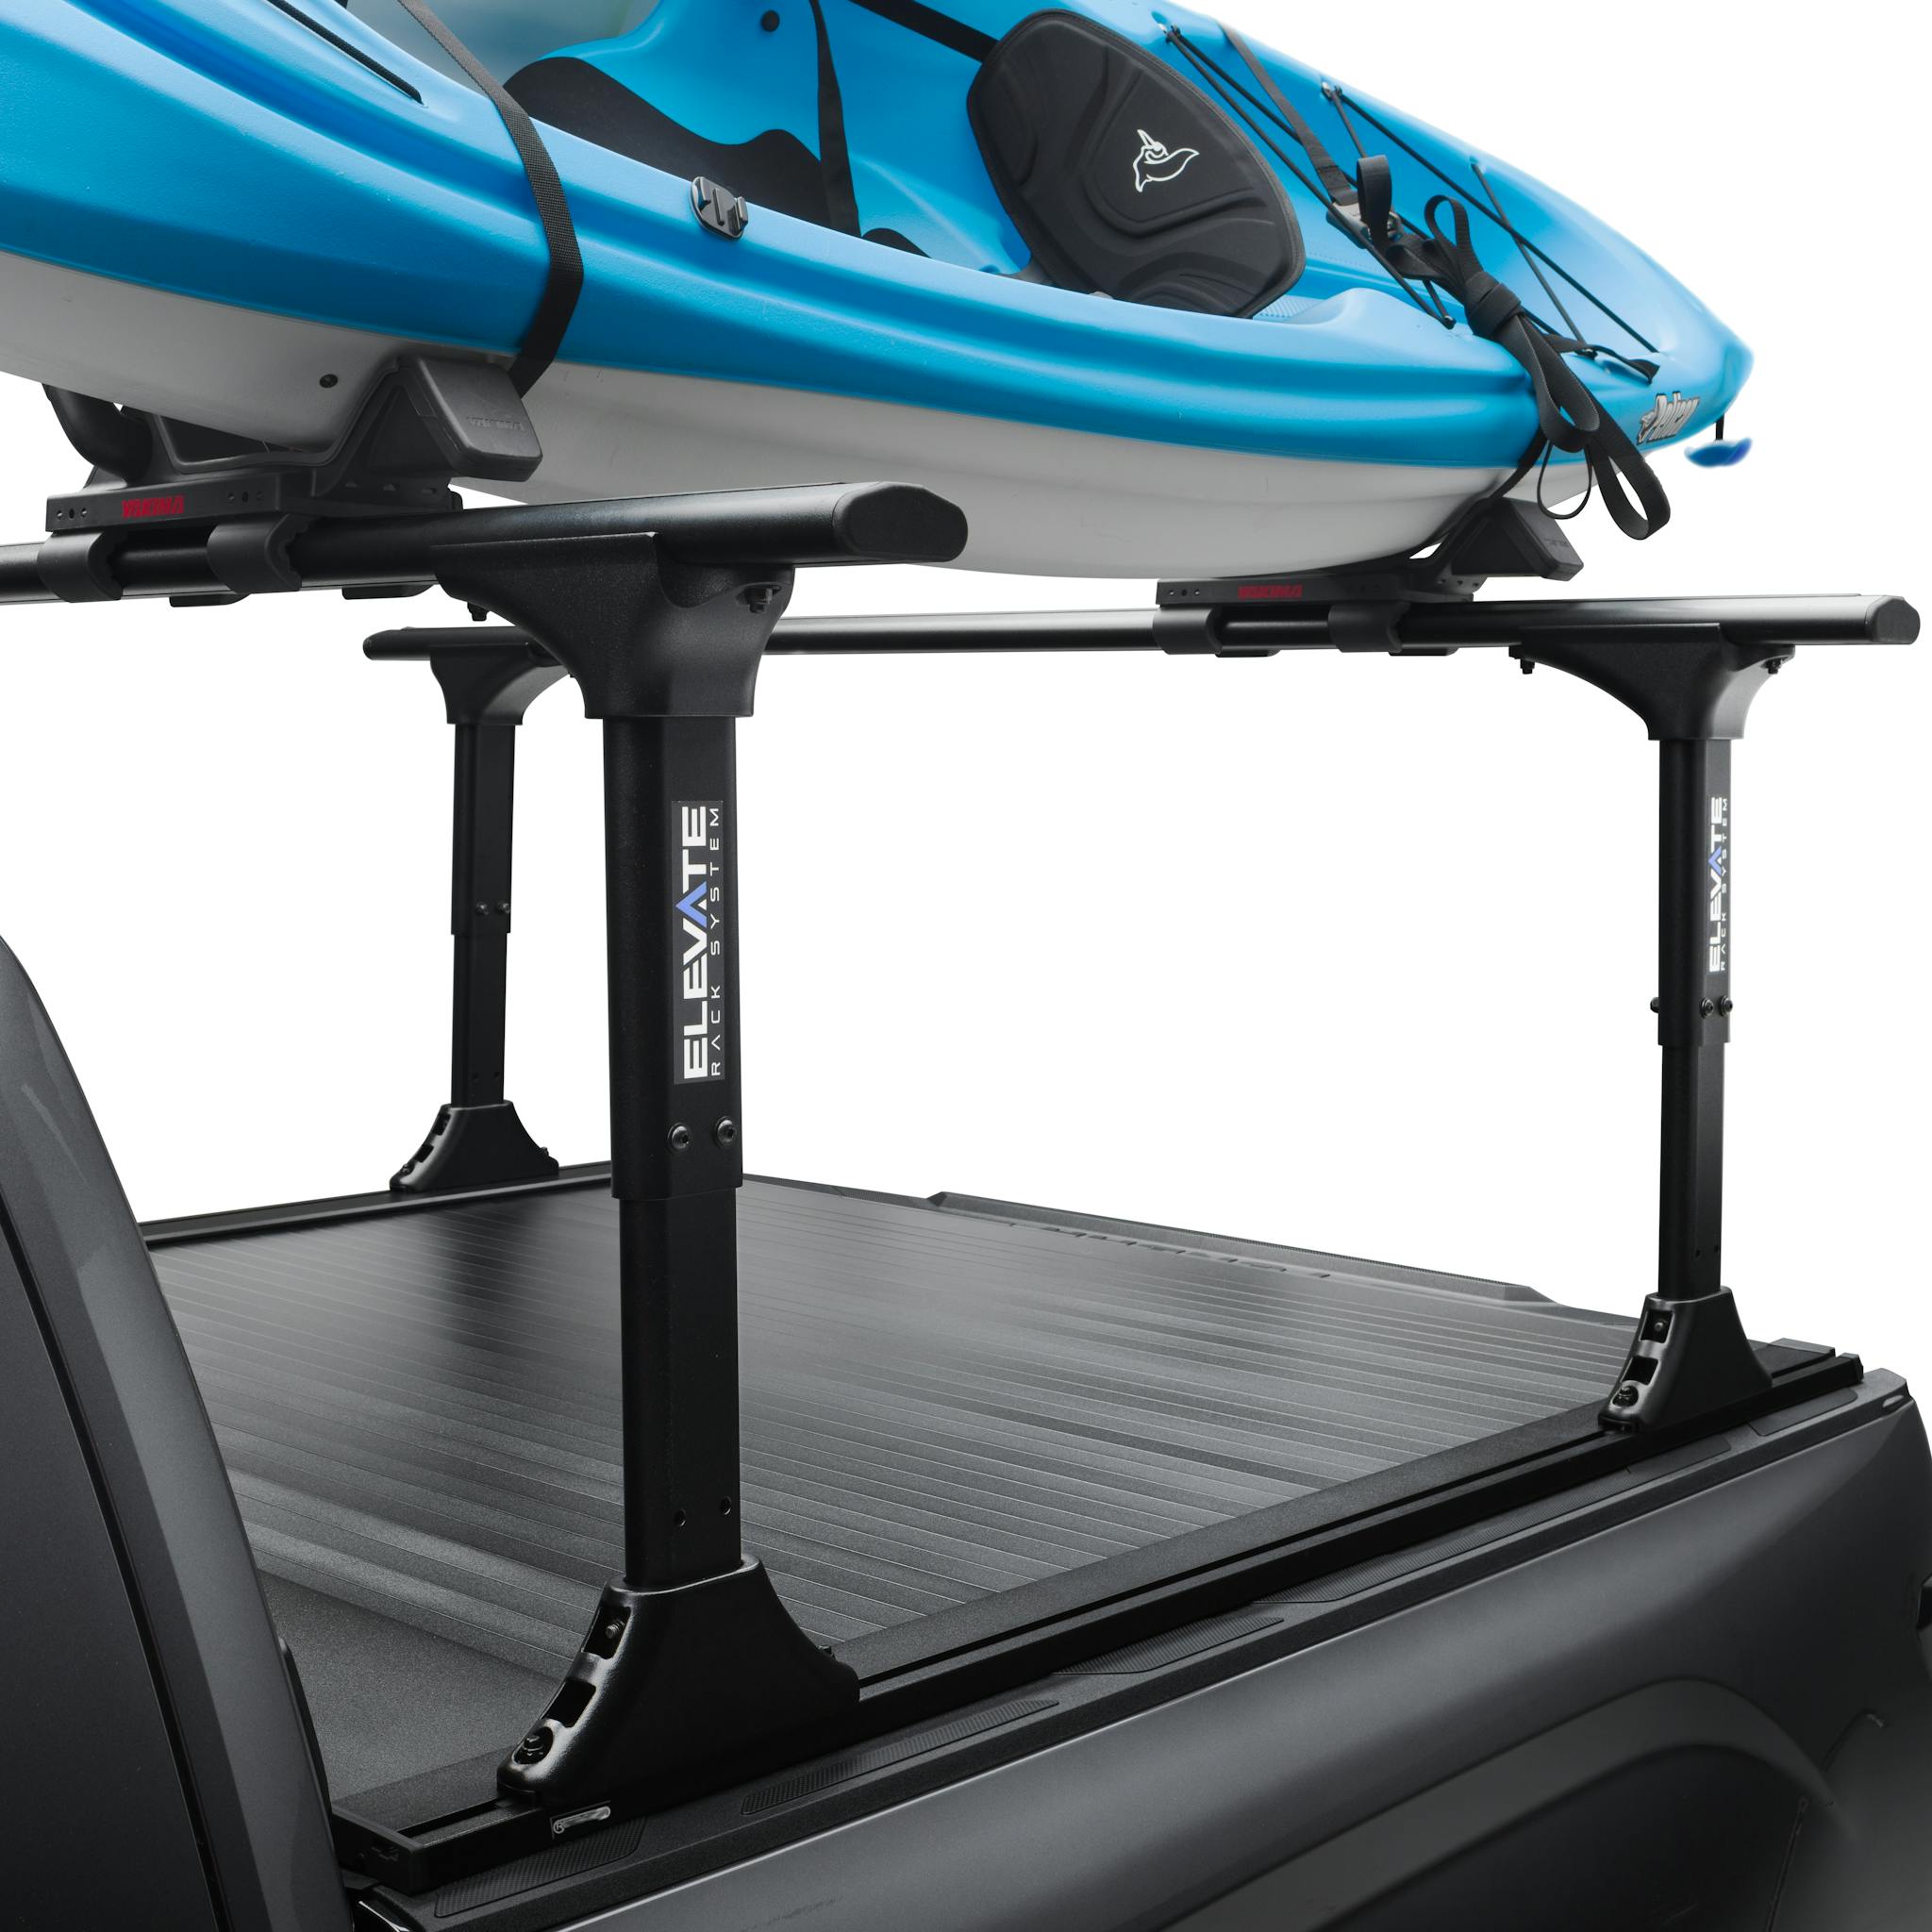 RetraxOne XR Tonneau Cover and TruXedo Elevate Truck Rack Side View Close Up with Kayak